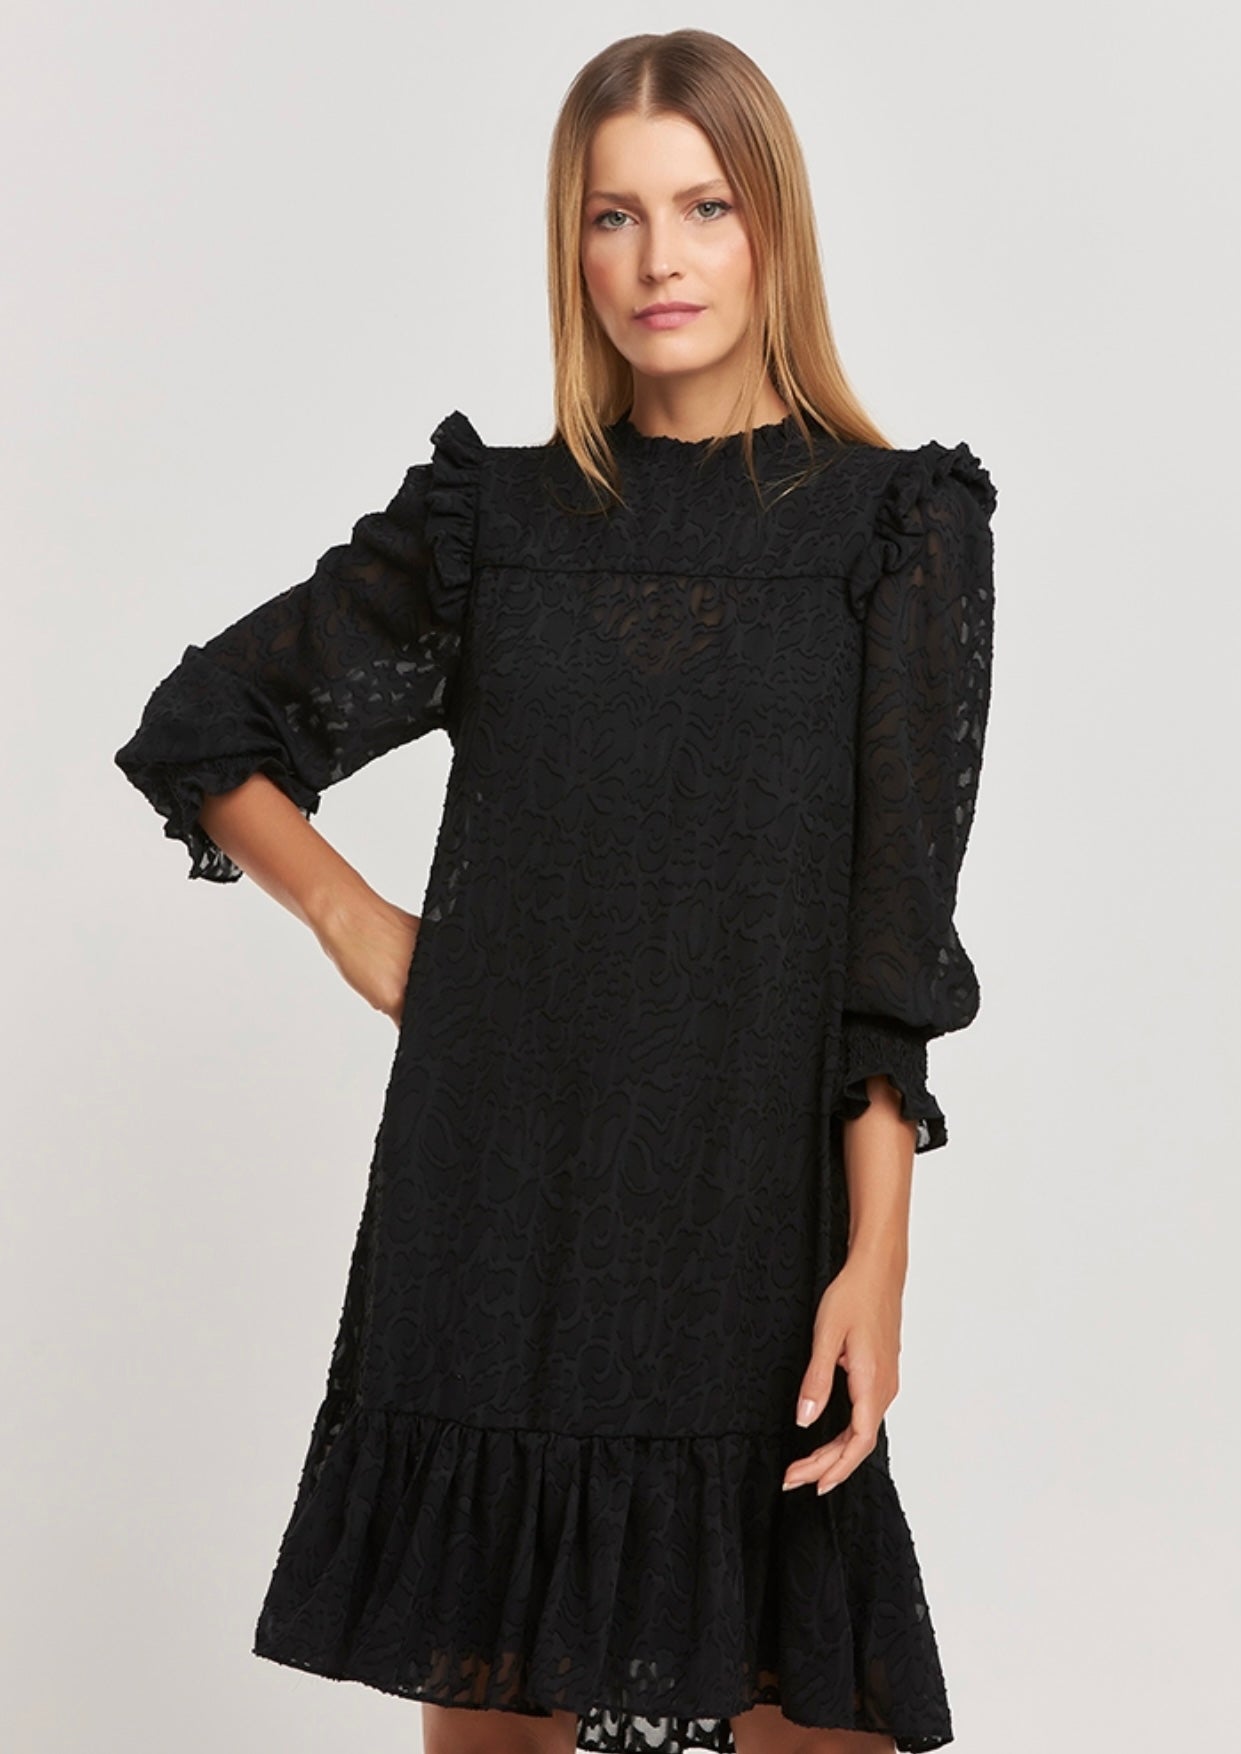 LYDIE Boat Neck Puff Sleeve Mid-Length Dress - FINAL SALE